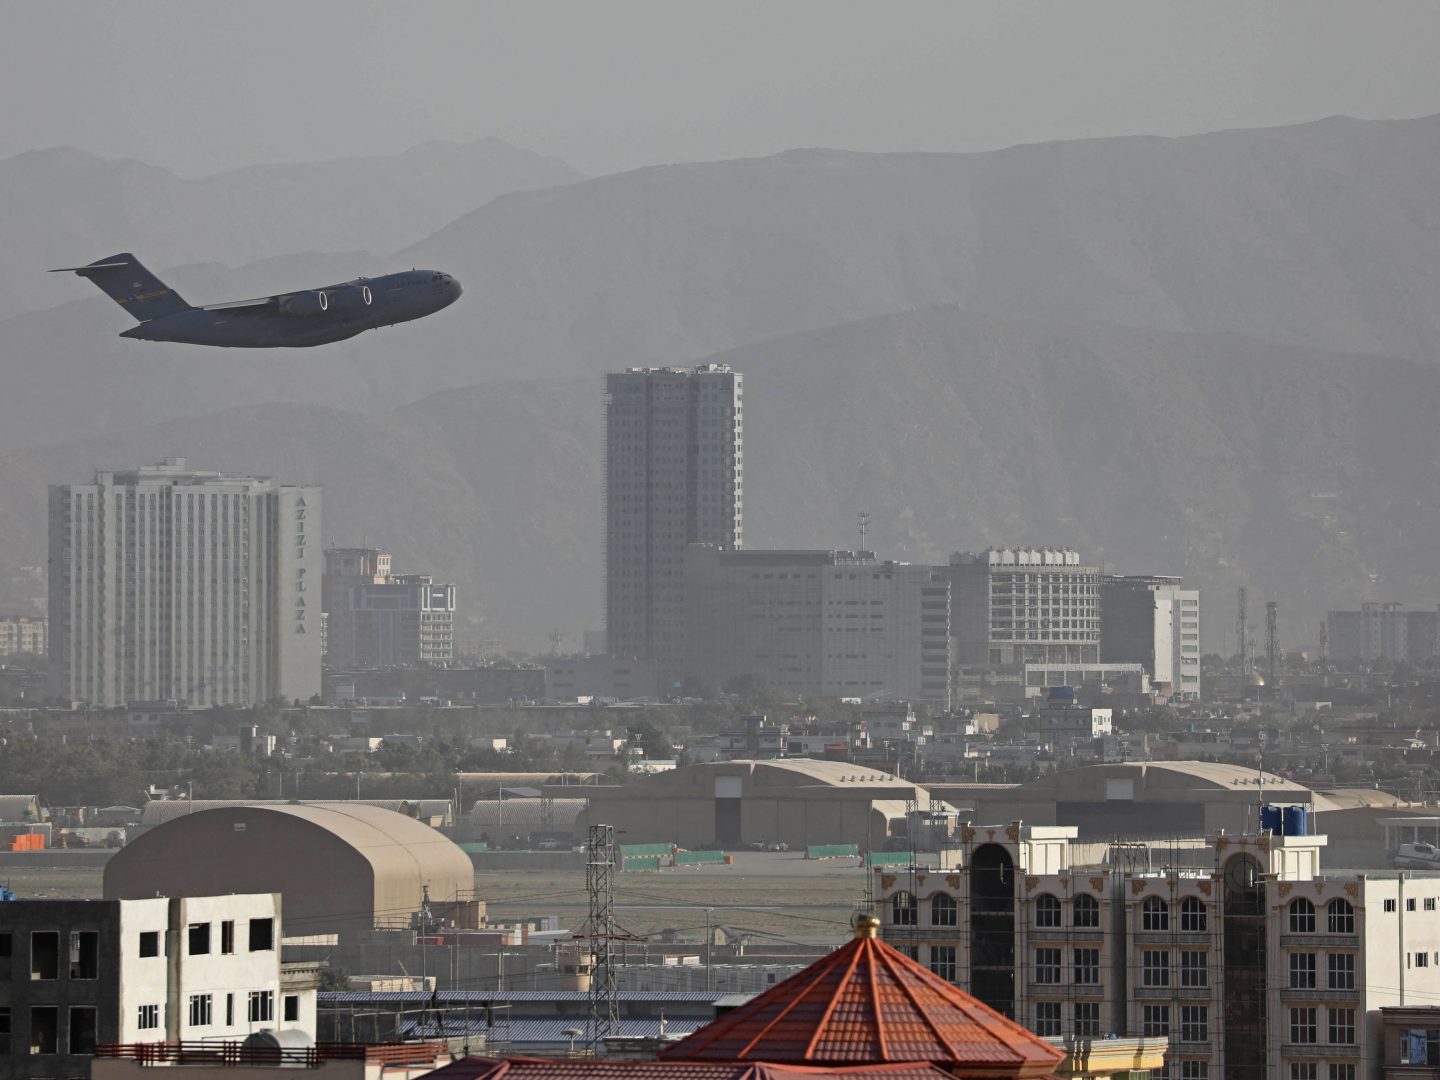 TOPSHOT - A US Air Force aircraft takes off from the military airport in Kabul on August 27, 2021, as the Pentagon said the evacuation of tens of thousands of people from Afghanistan still faces more possible attacks like the bombing that killed scores of people outside the Kabul airport. 